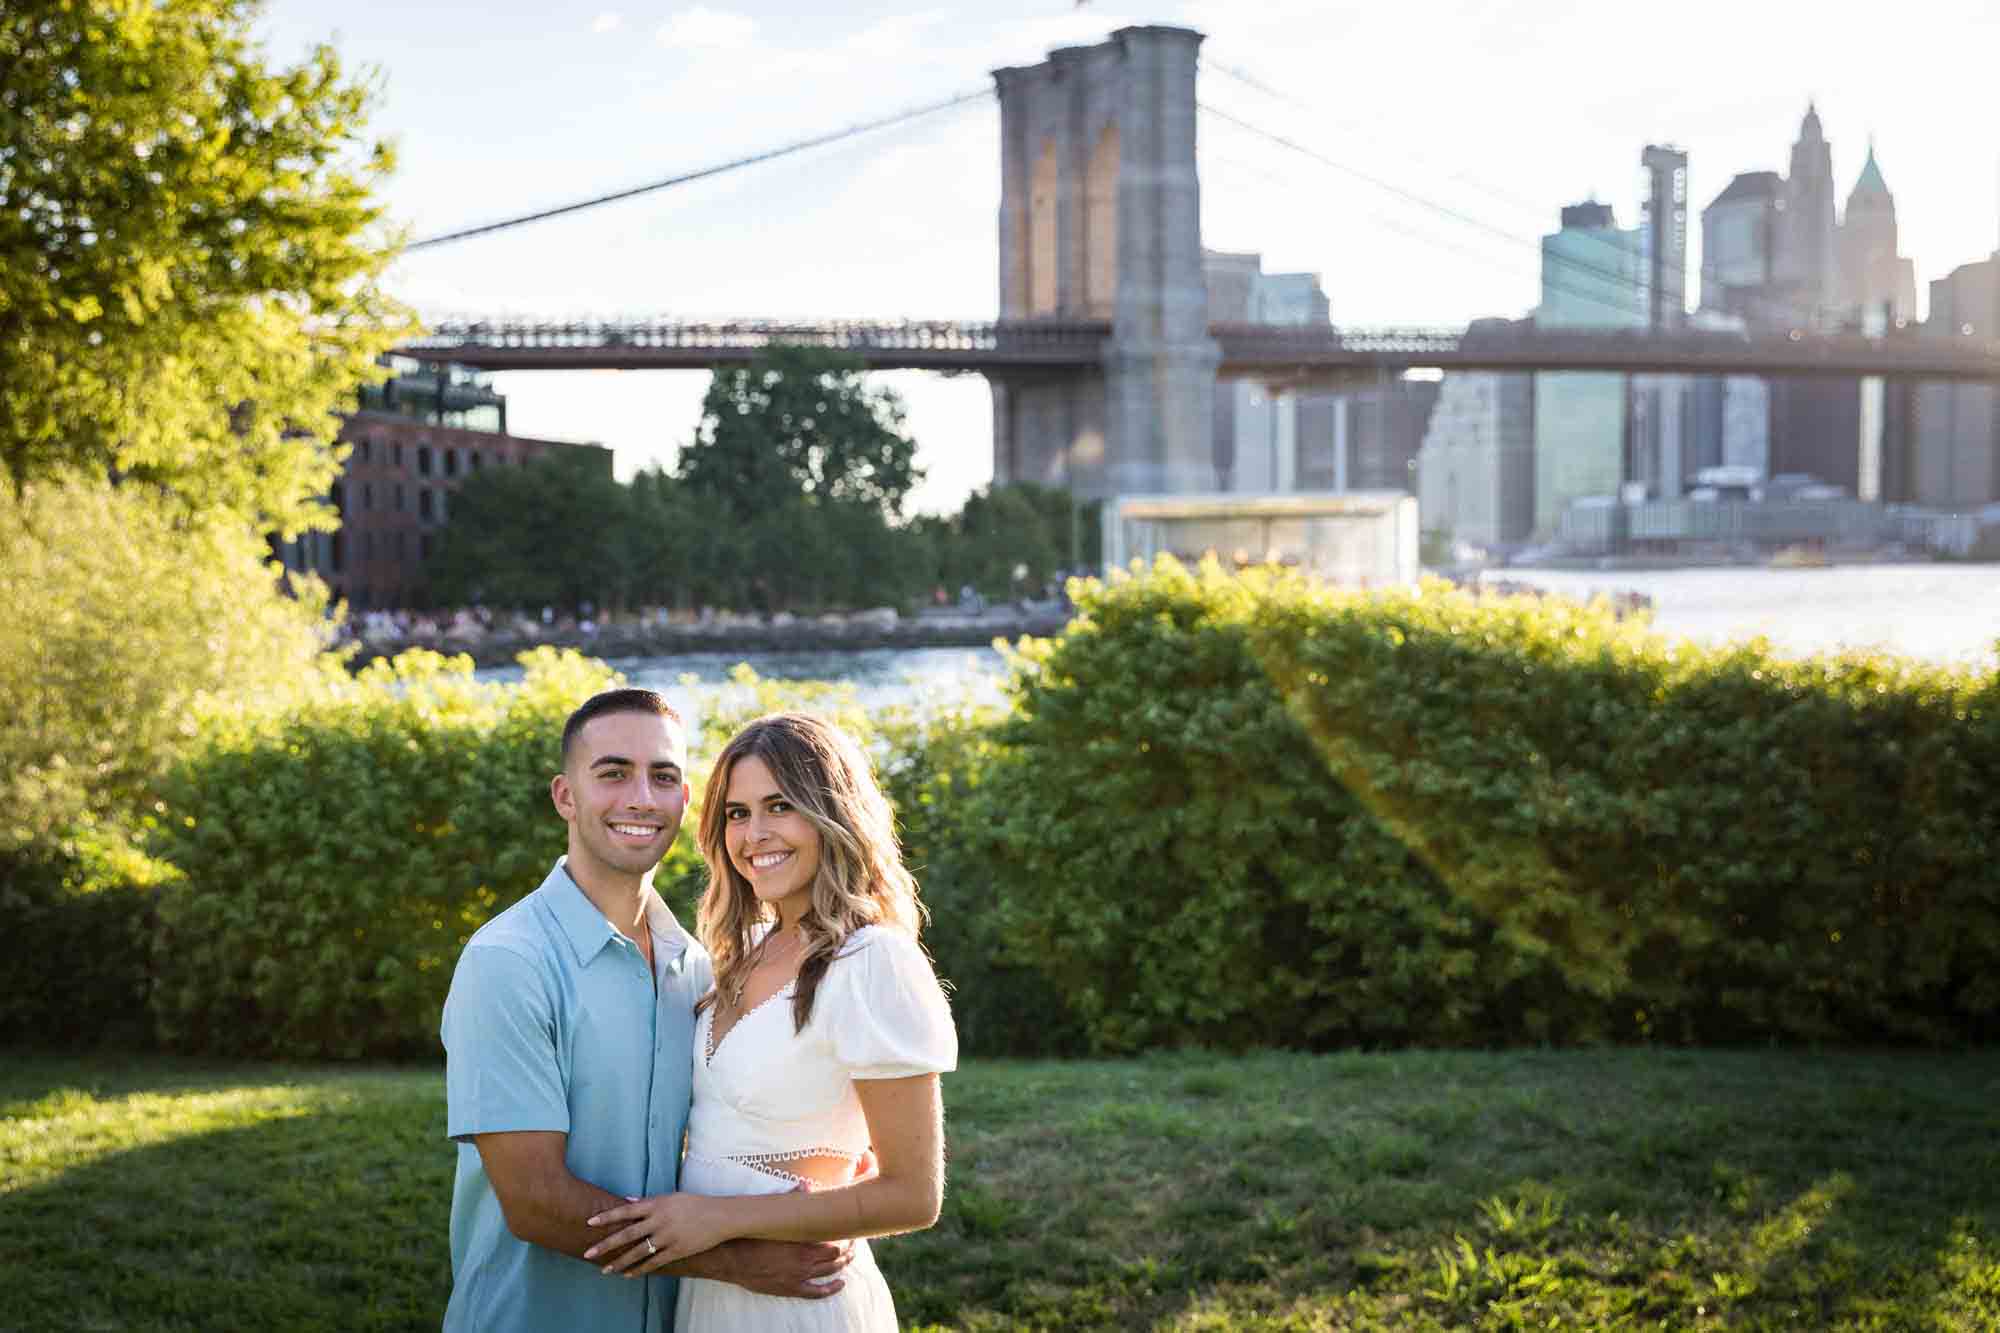 Couple hugging in grass with Brooklyn Bridge and river in background